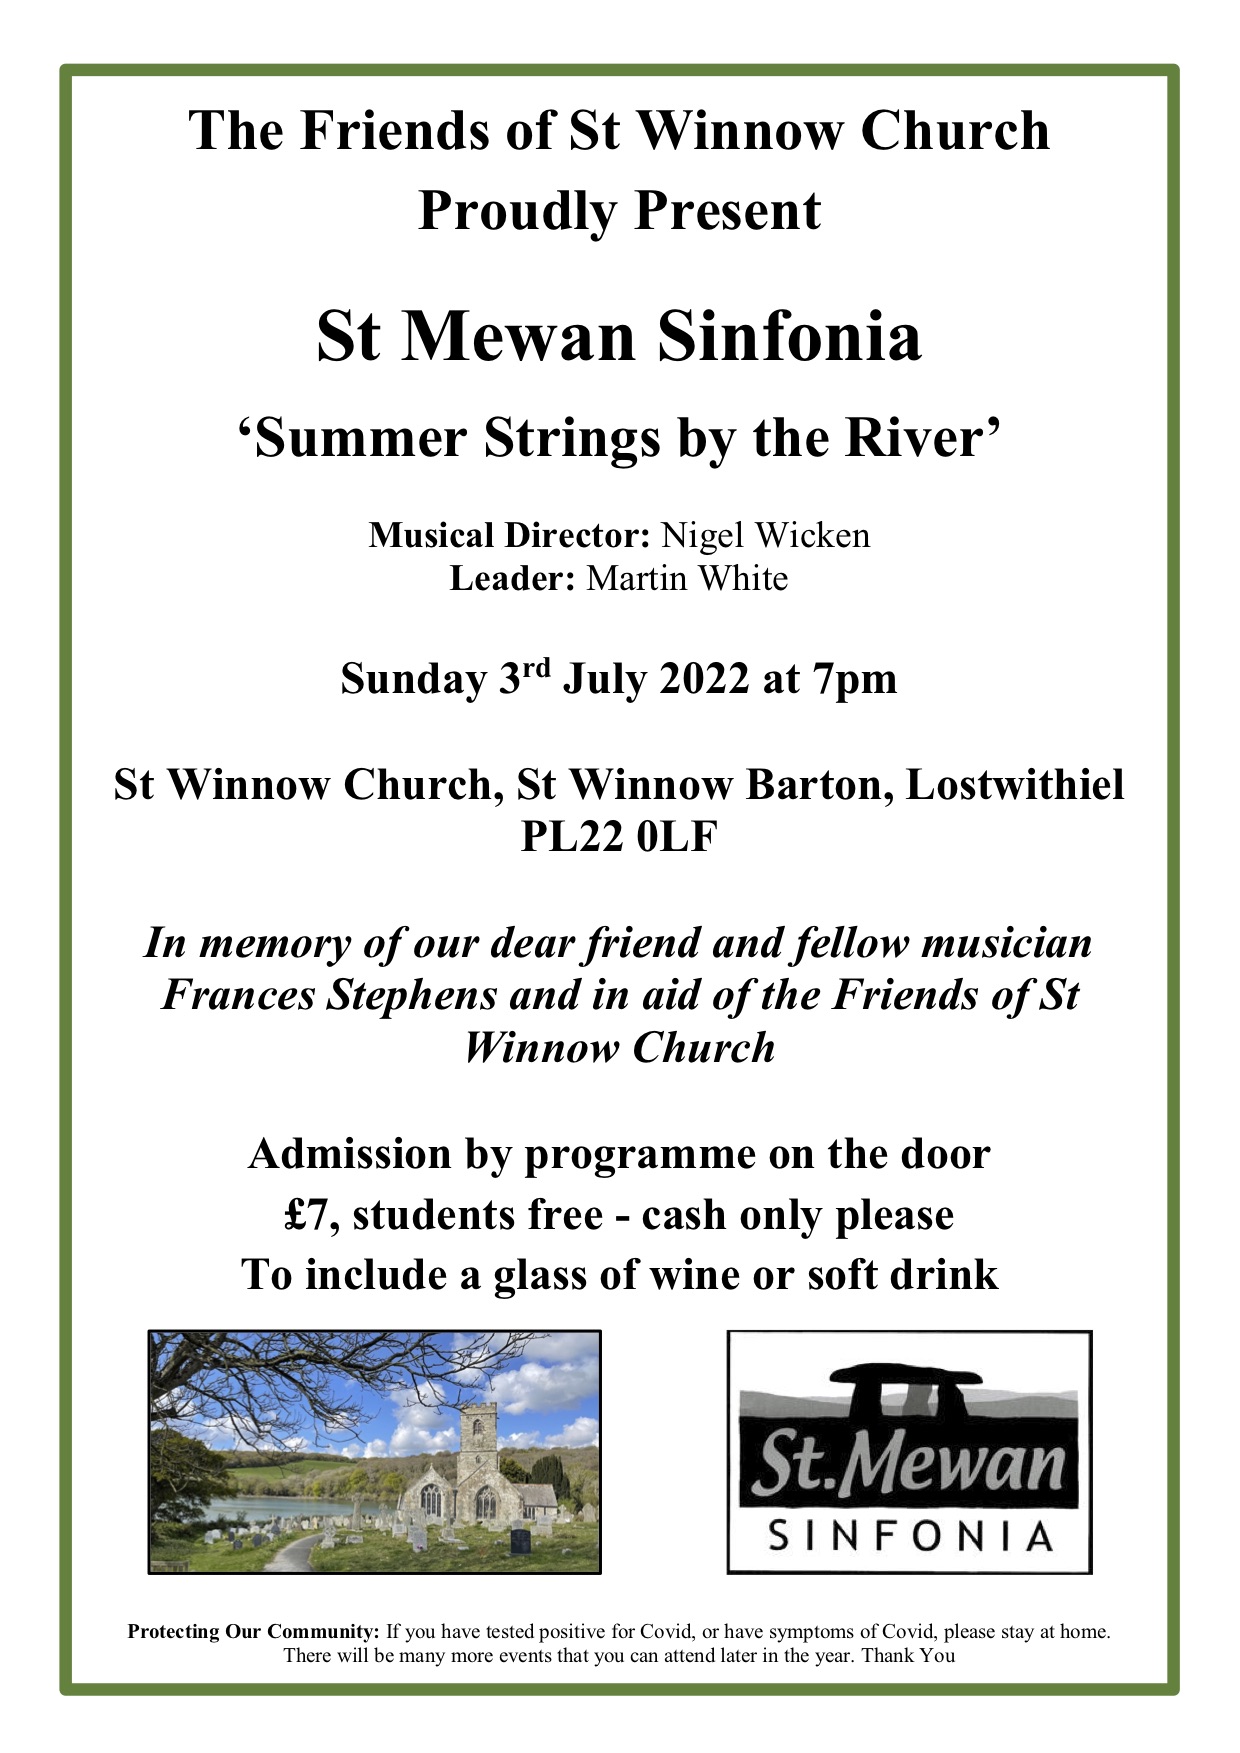 Summer Strings by the River - St Mewan Sinfonia Concert